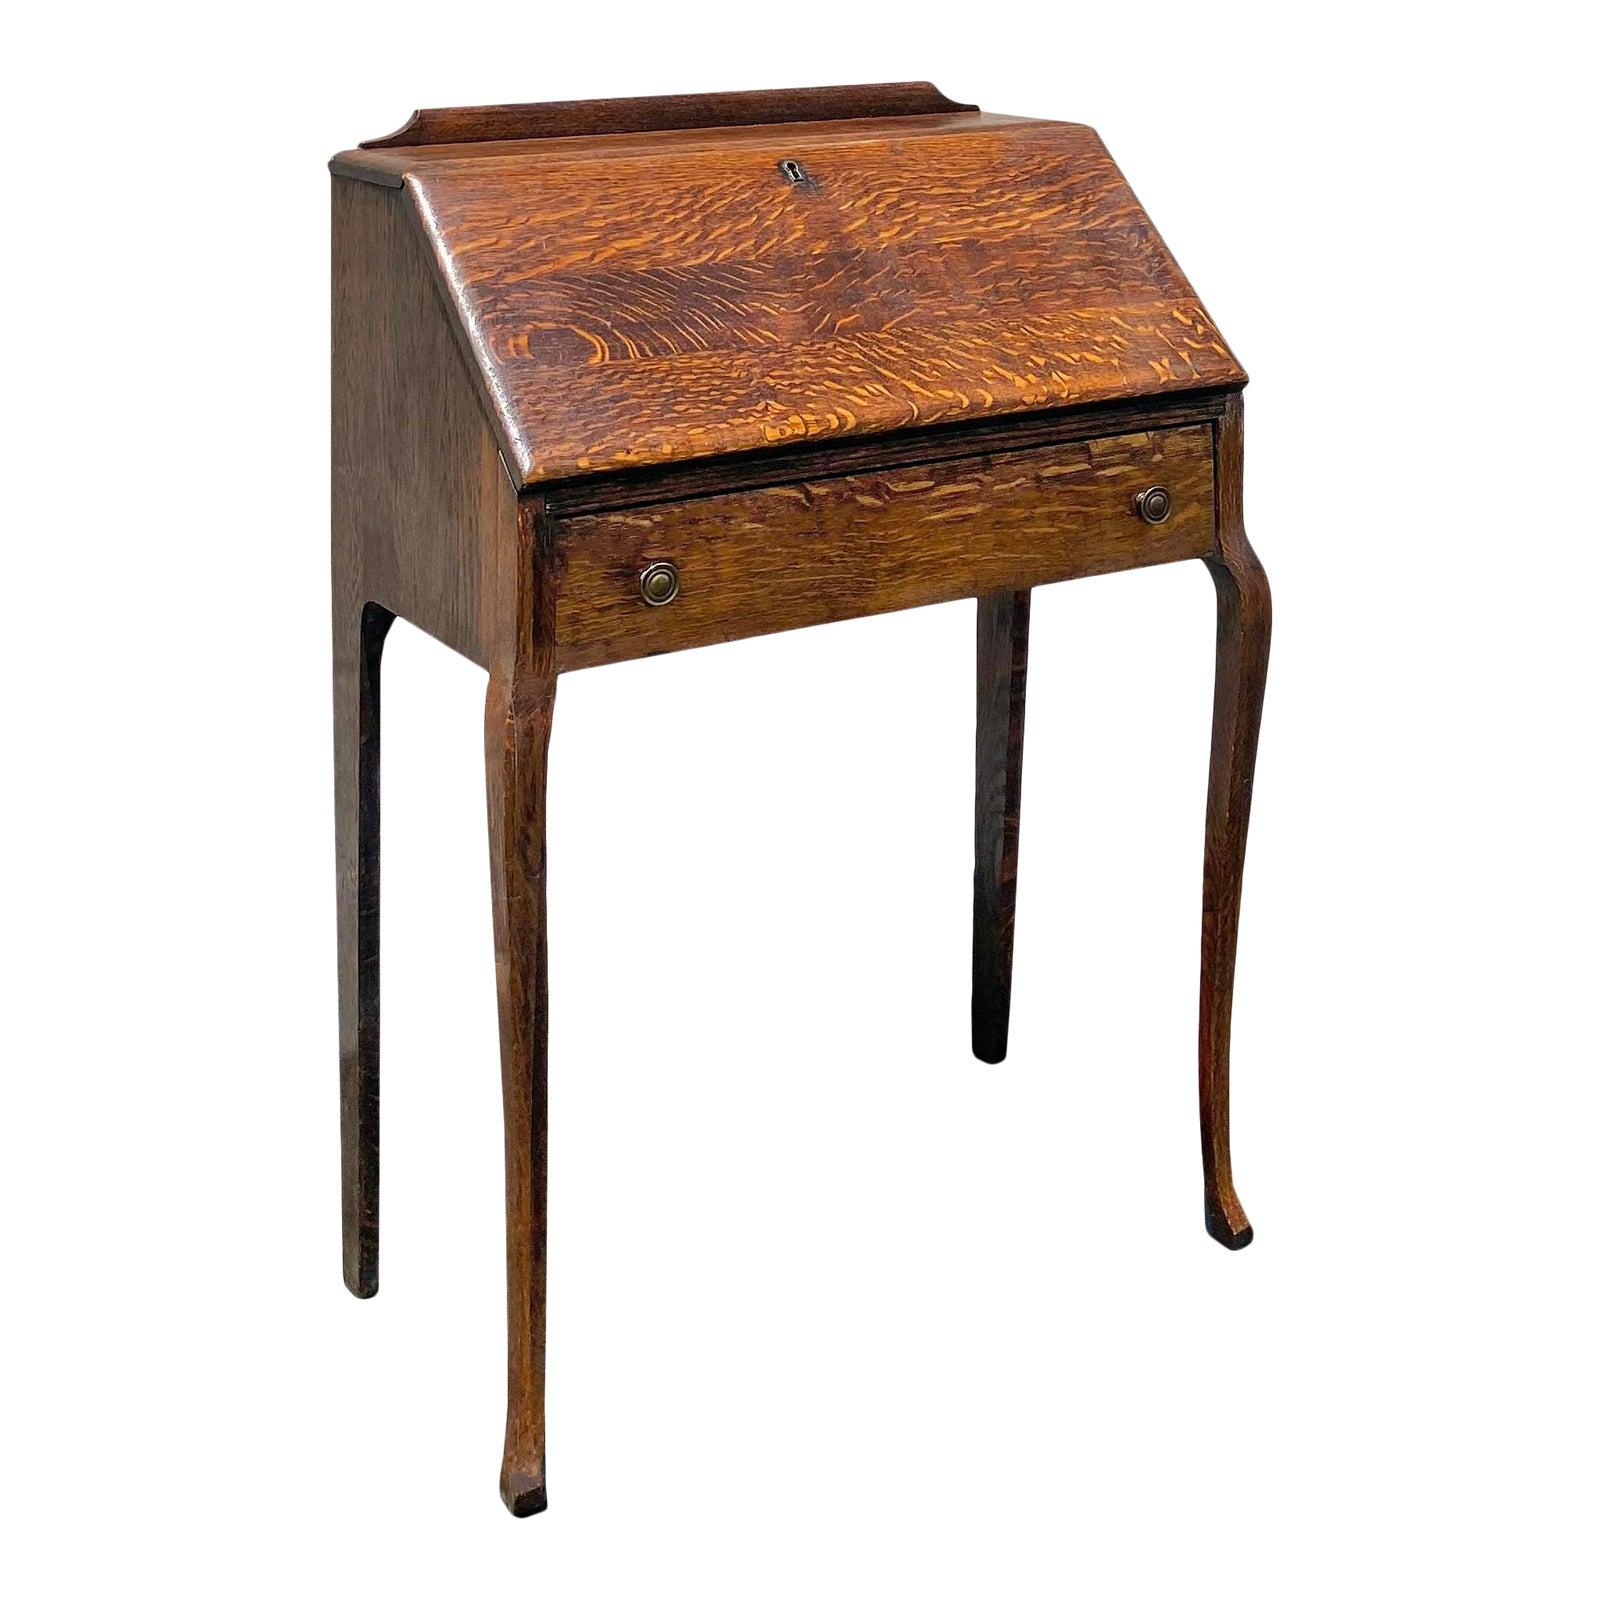 A beautiful well-maintained late 19th century American antique writing desk with a pull down table top, that unfolds to a desktop with a petite pull out drawer and wood dividers. A larger drawer is positioned at the bottom. Height with the little